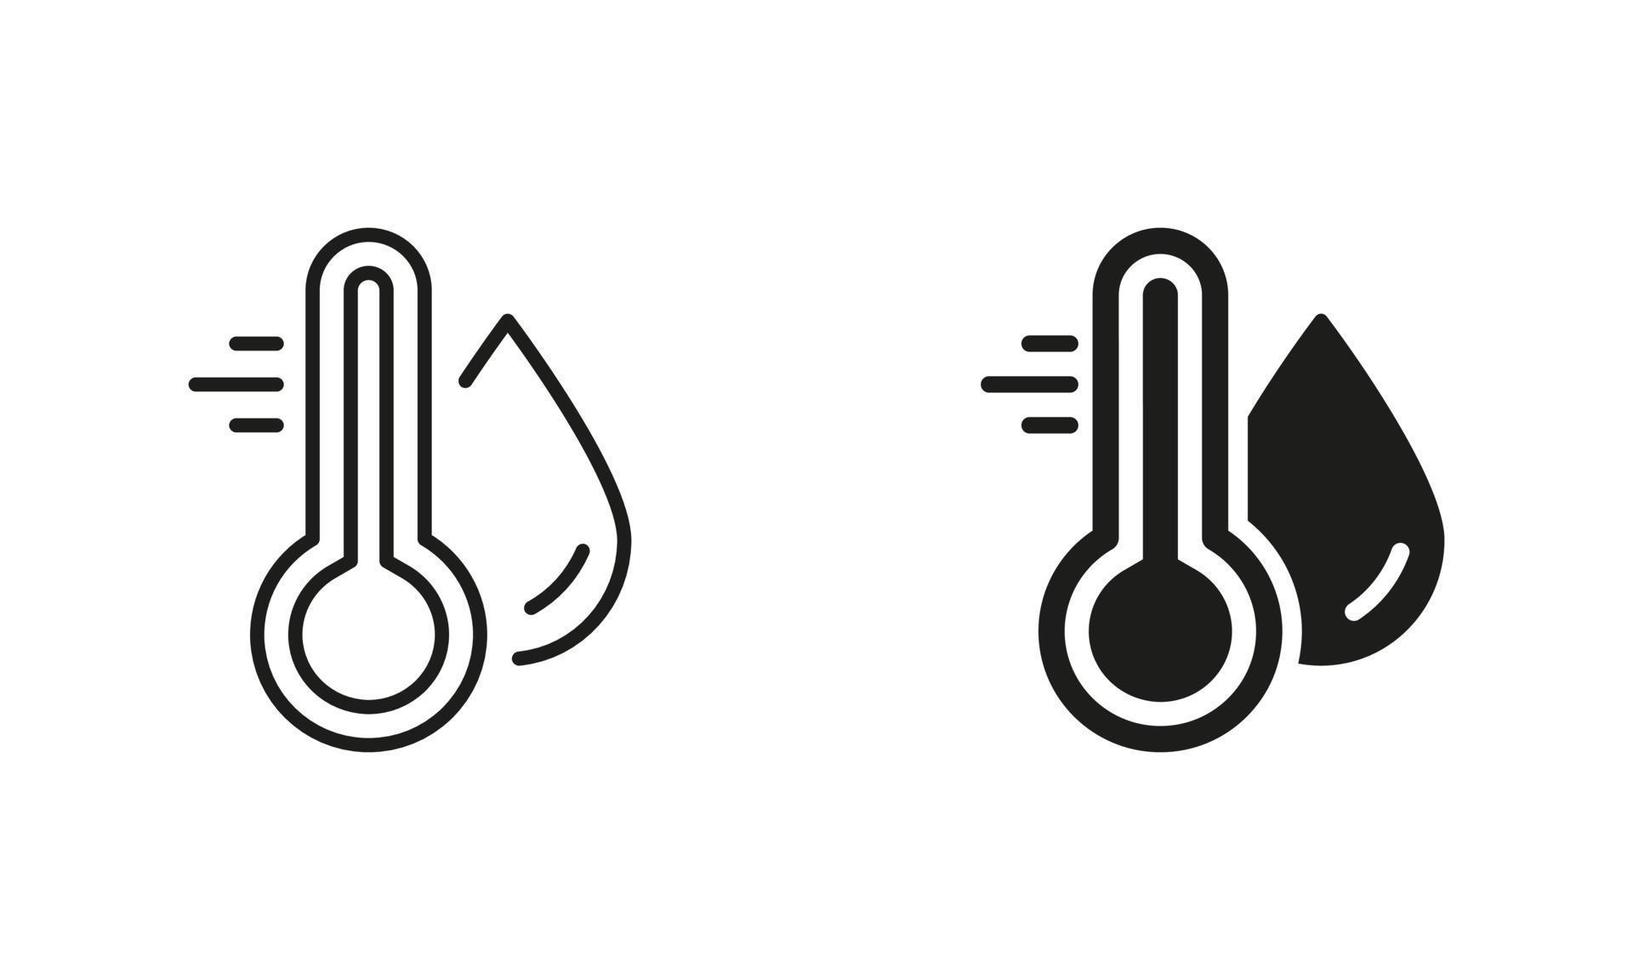 Water Temperature Indicator Silhouette and Line Icon Set. Mercury Thermometer and Water Drop Black Pictogram. Temperature and Humidity Level Sign Collection. Isolated Vector Illustration.